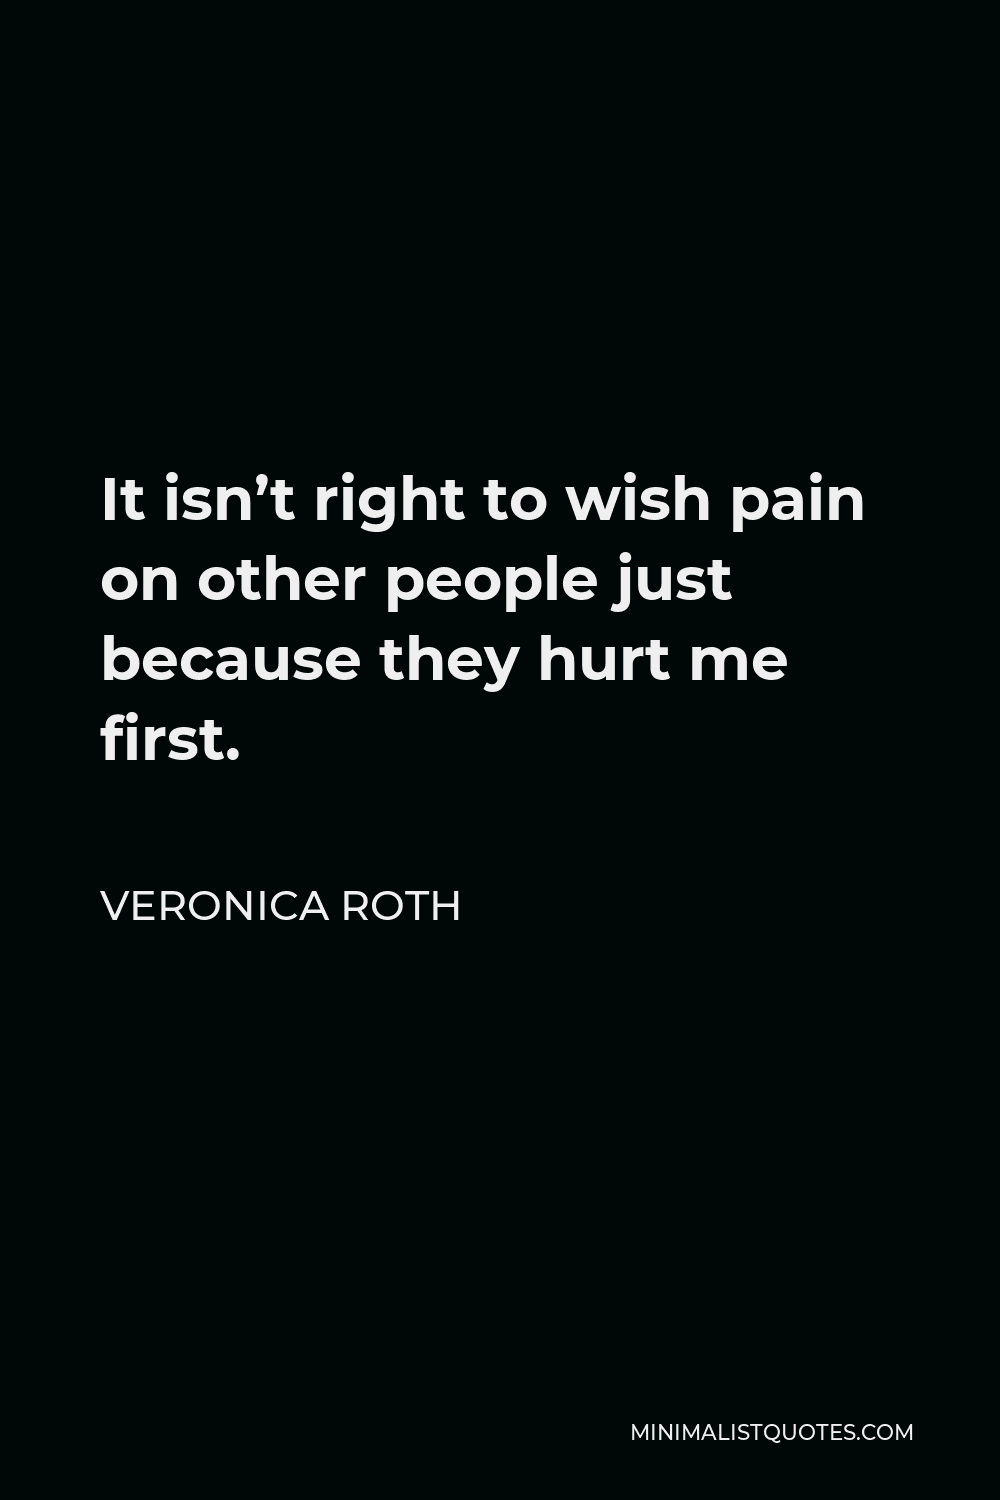 Veronica Roth Quote - It isn’t right to wish pain on other people just because they hurt me first.